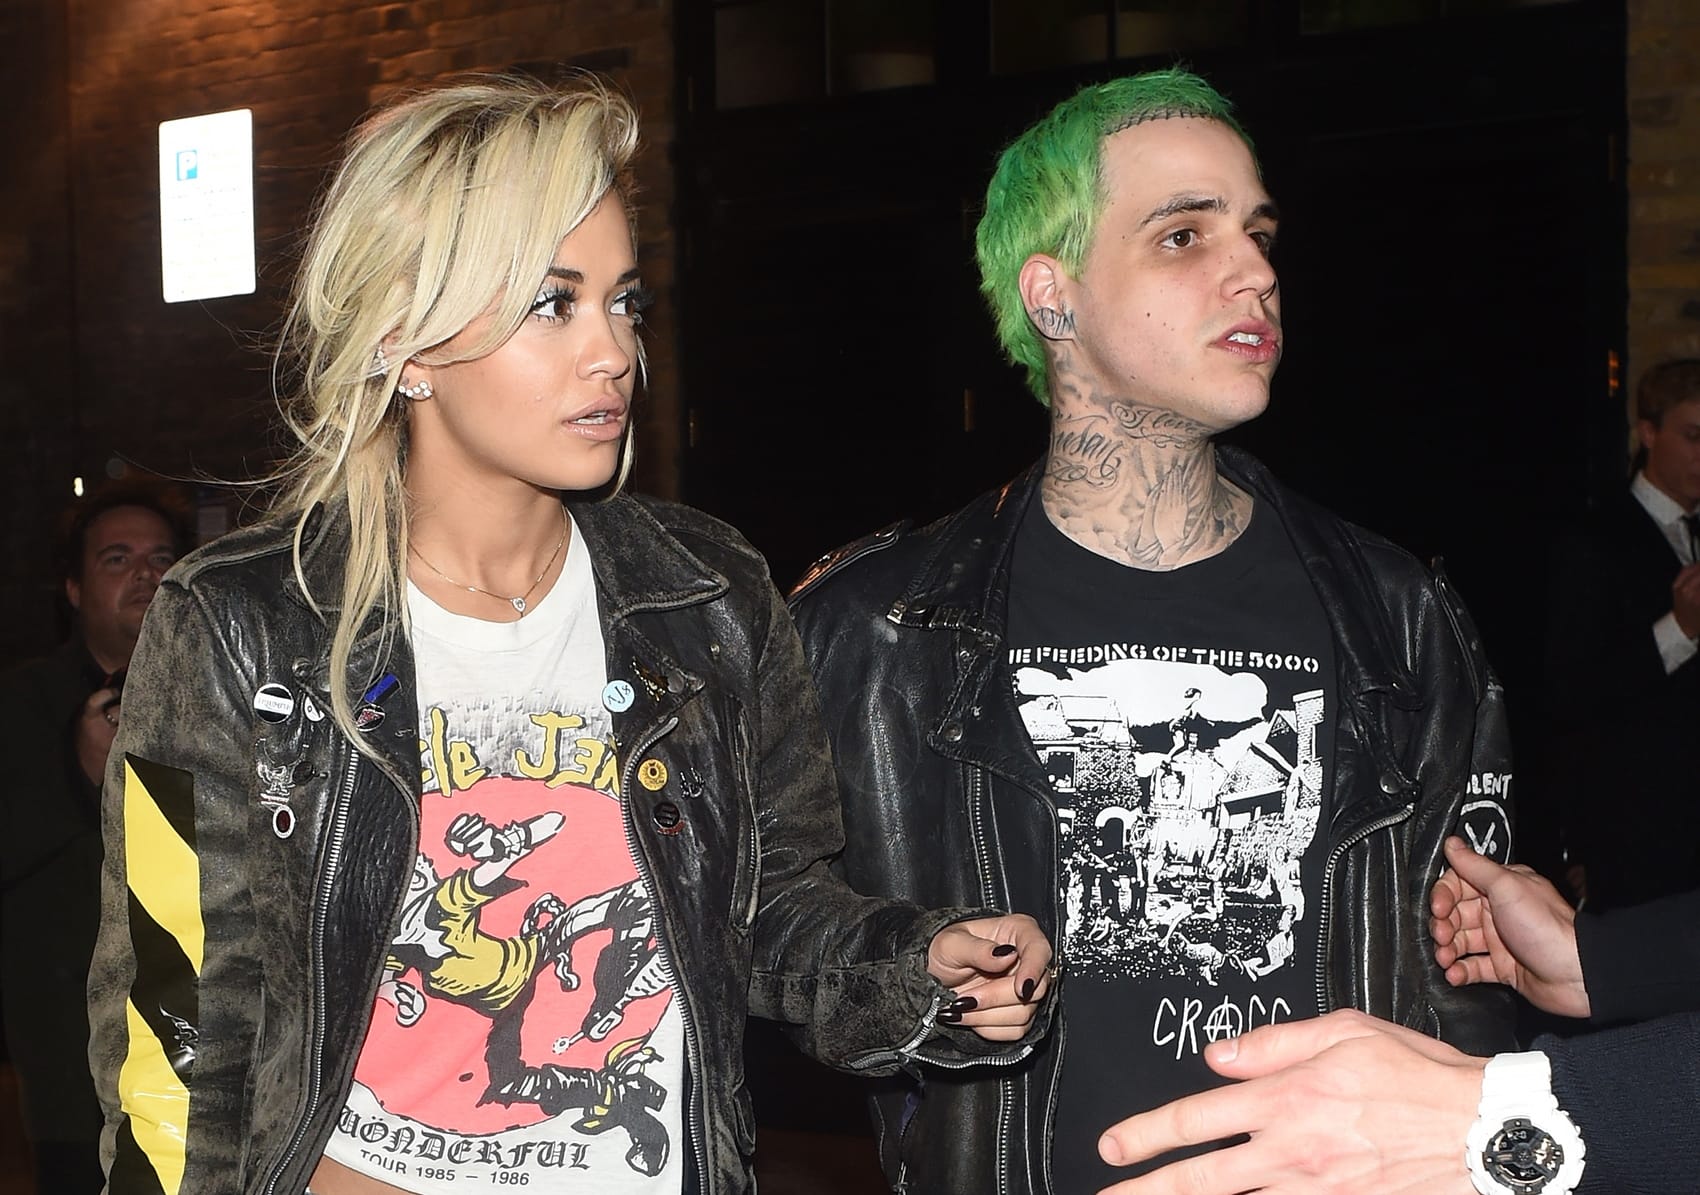 Richard “Ricky Hil” Hilfiger and Rita Ora broke up in July 2015 after dating for just over a year